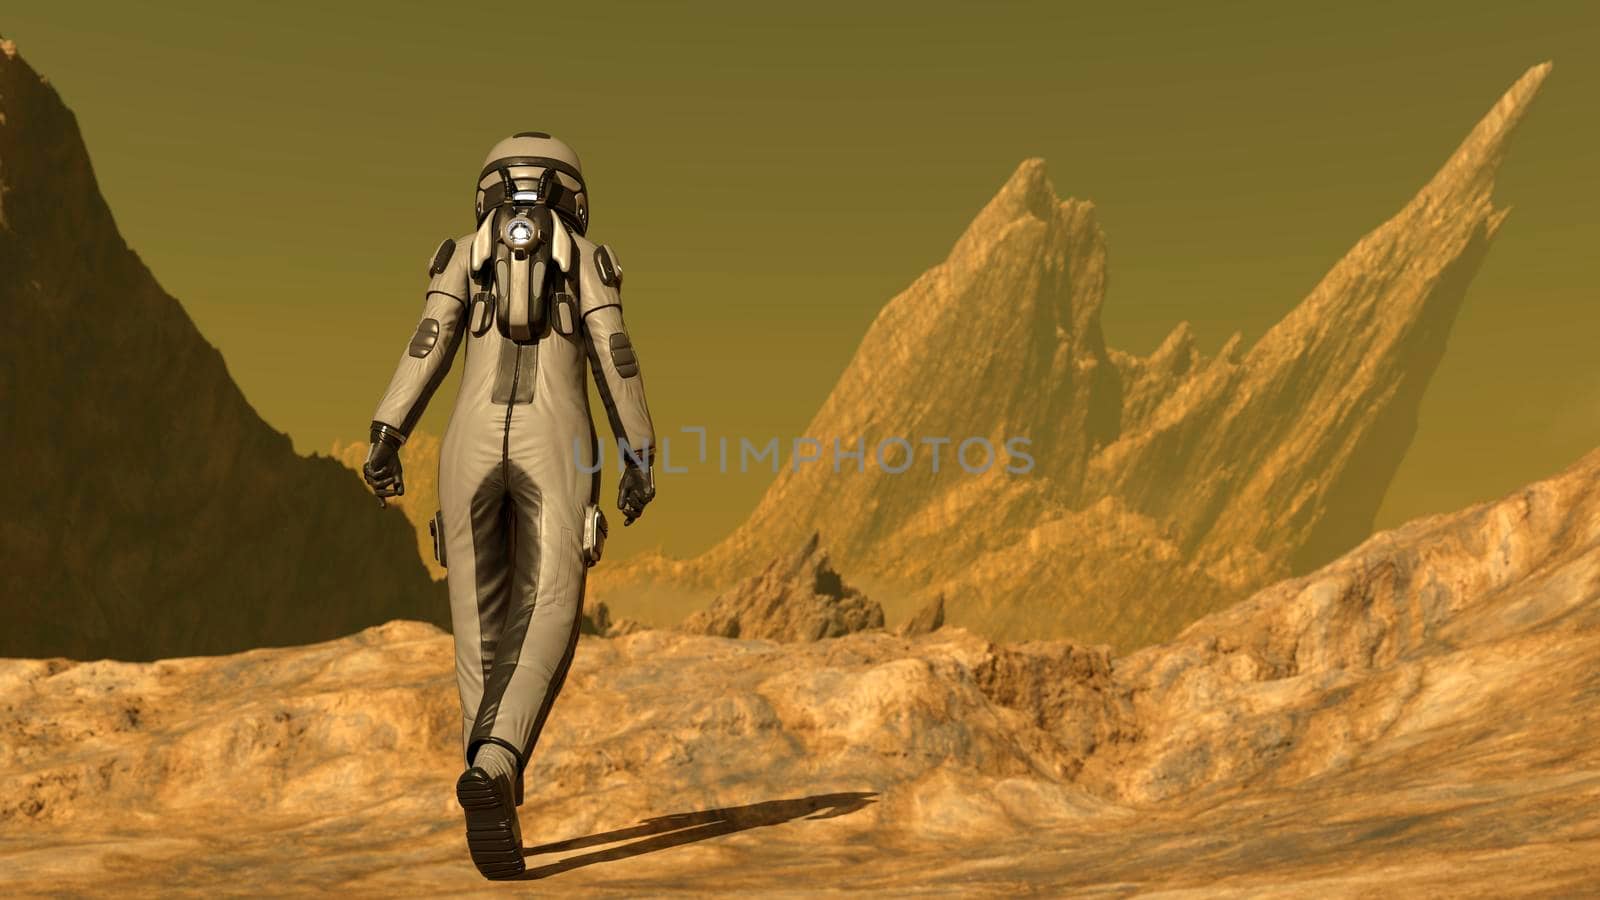 Space traveler exploring a new desert planet by ankarb